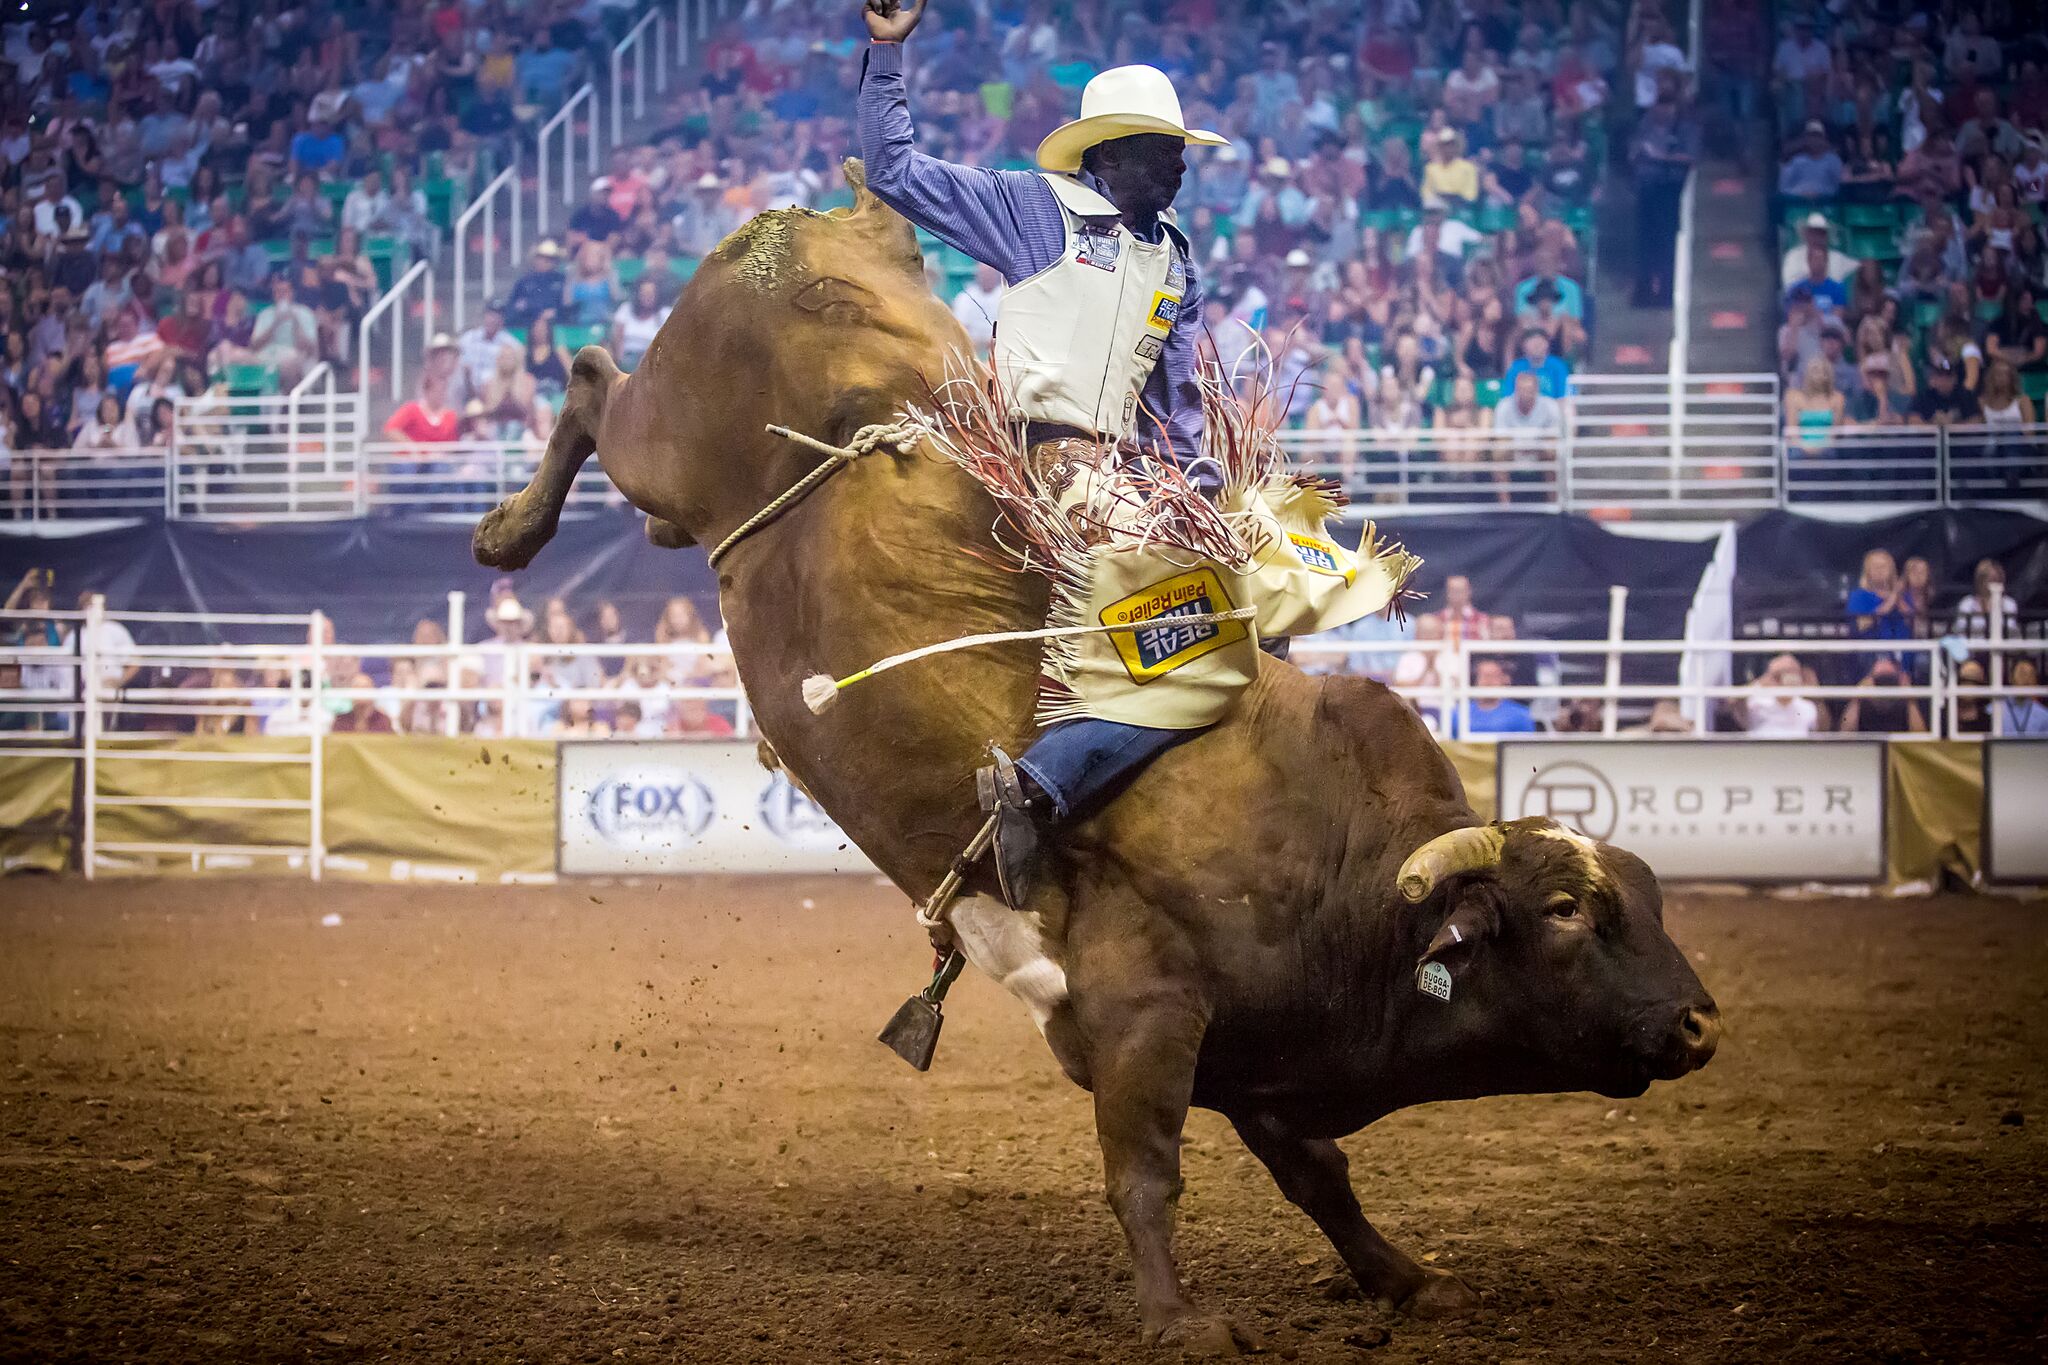 The rodeo is a really exciting event. Родео. Родео Хэнк.